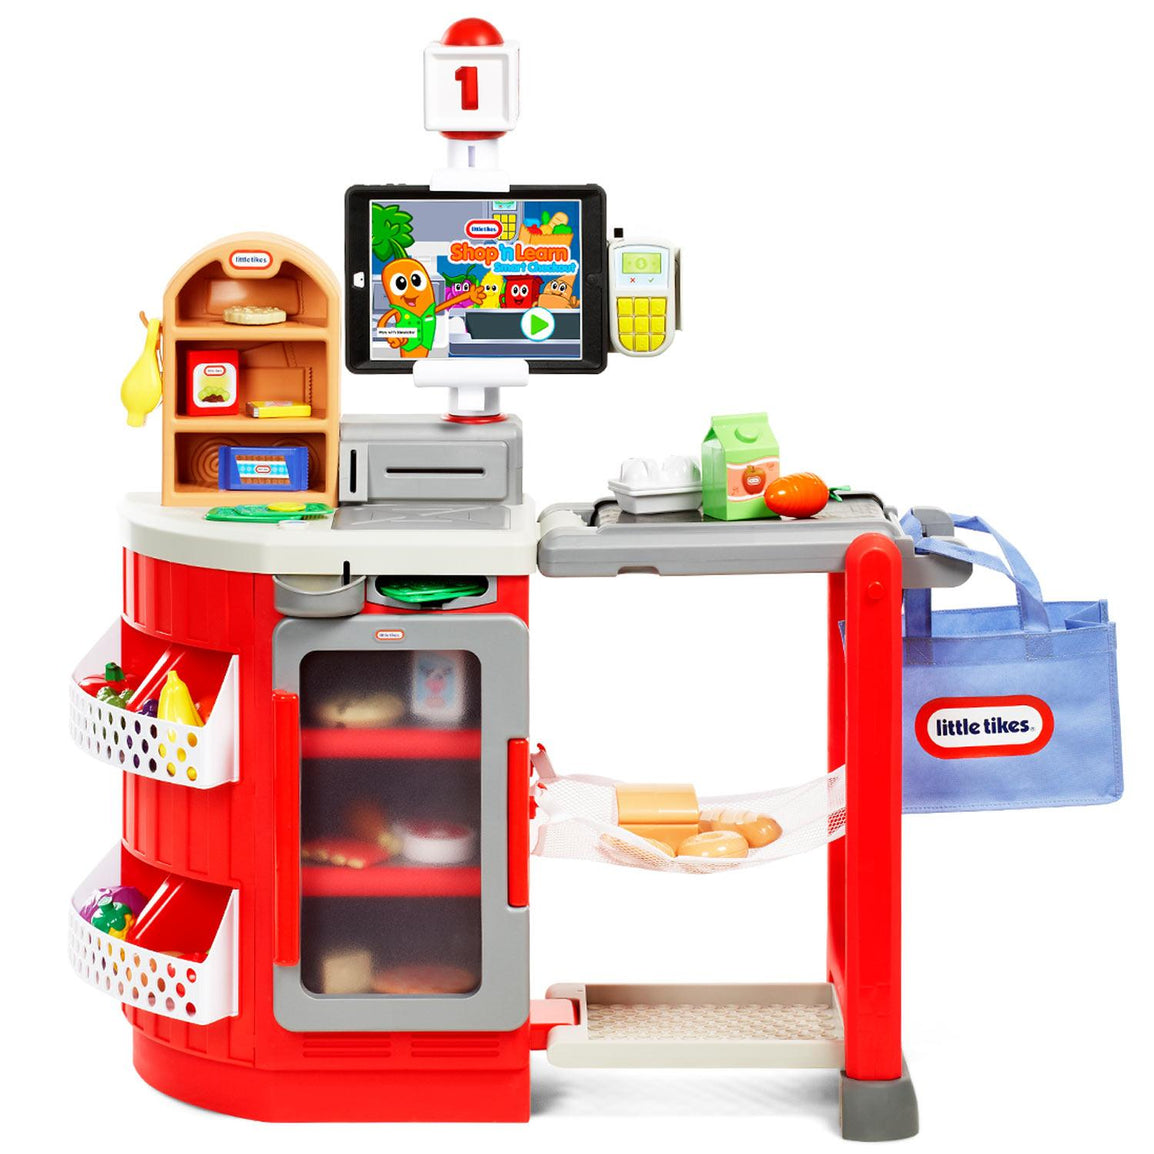 Shop 'n Learn™ Smart Checkout - Official Little Tikes Website